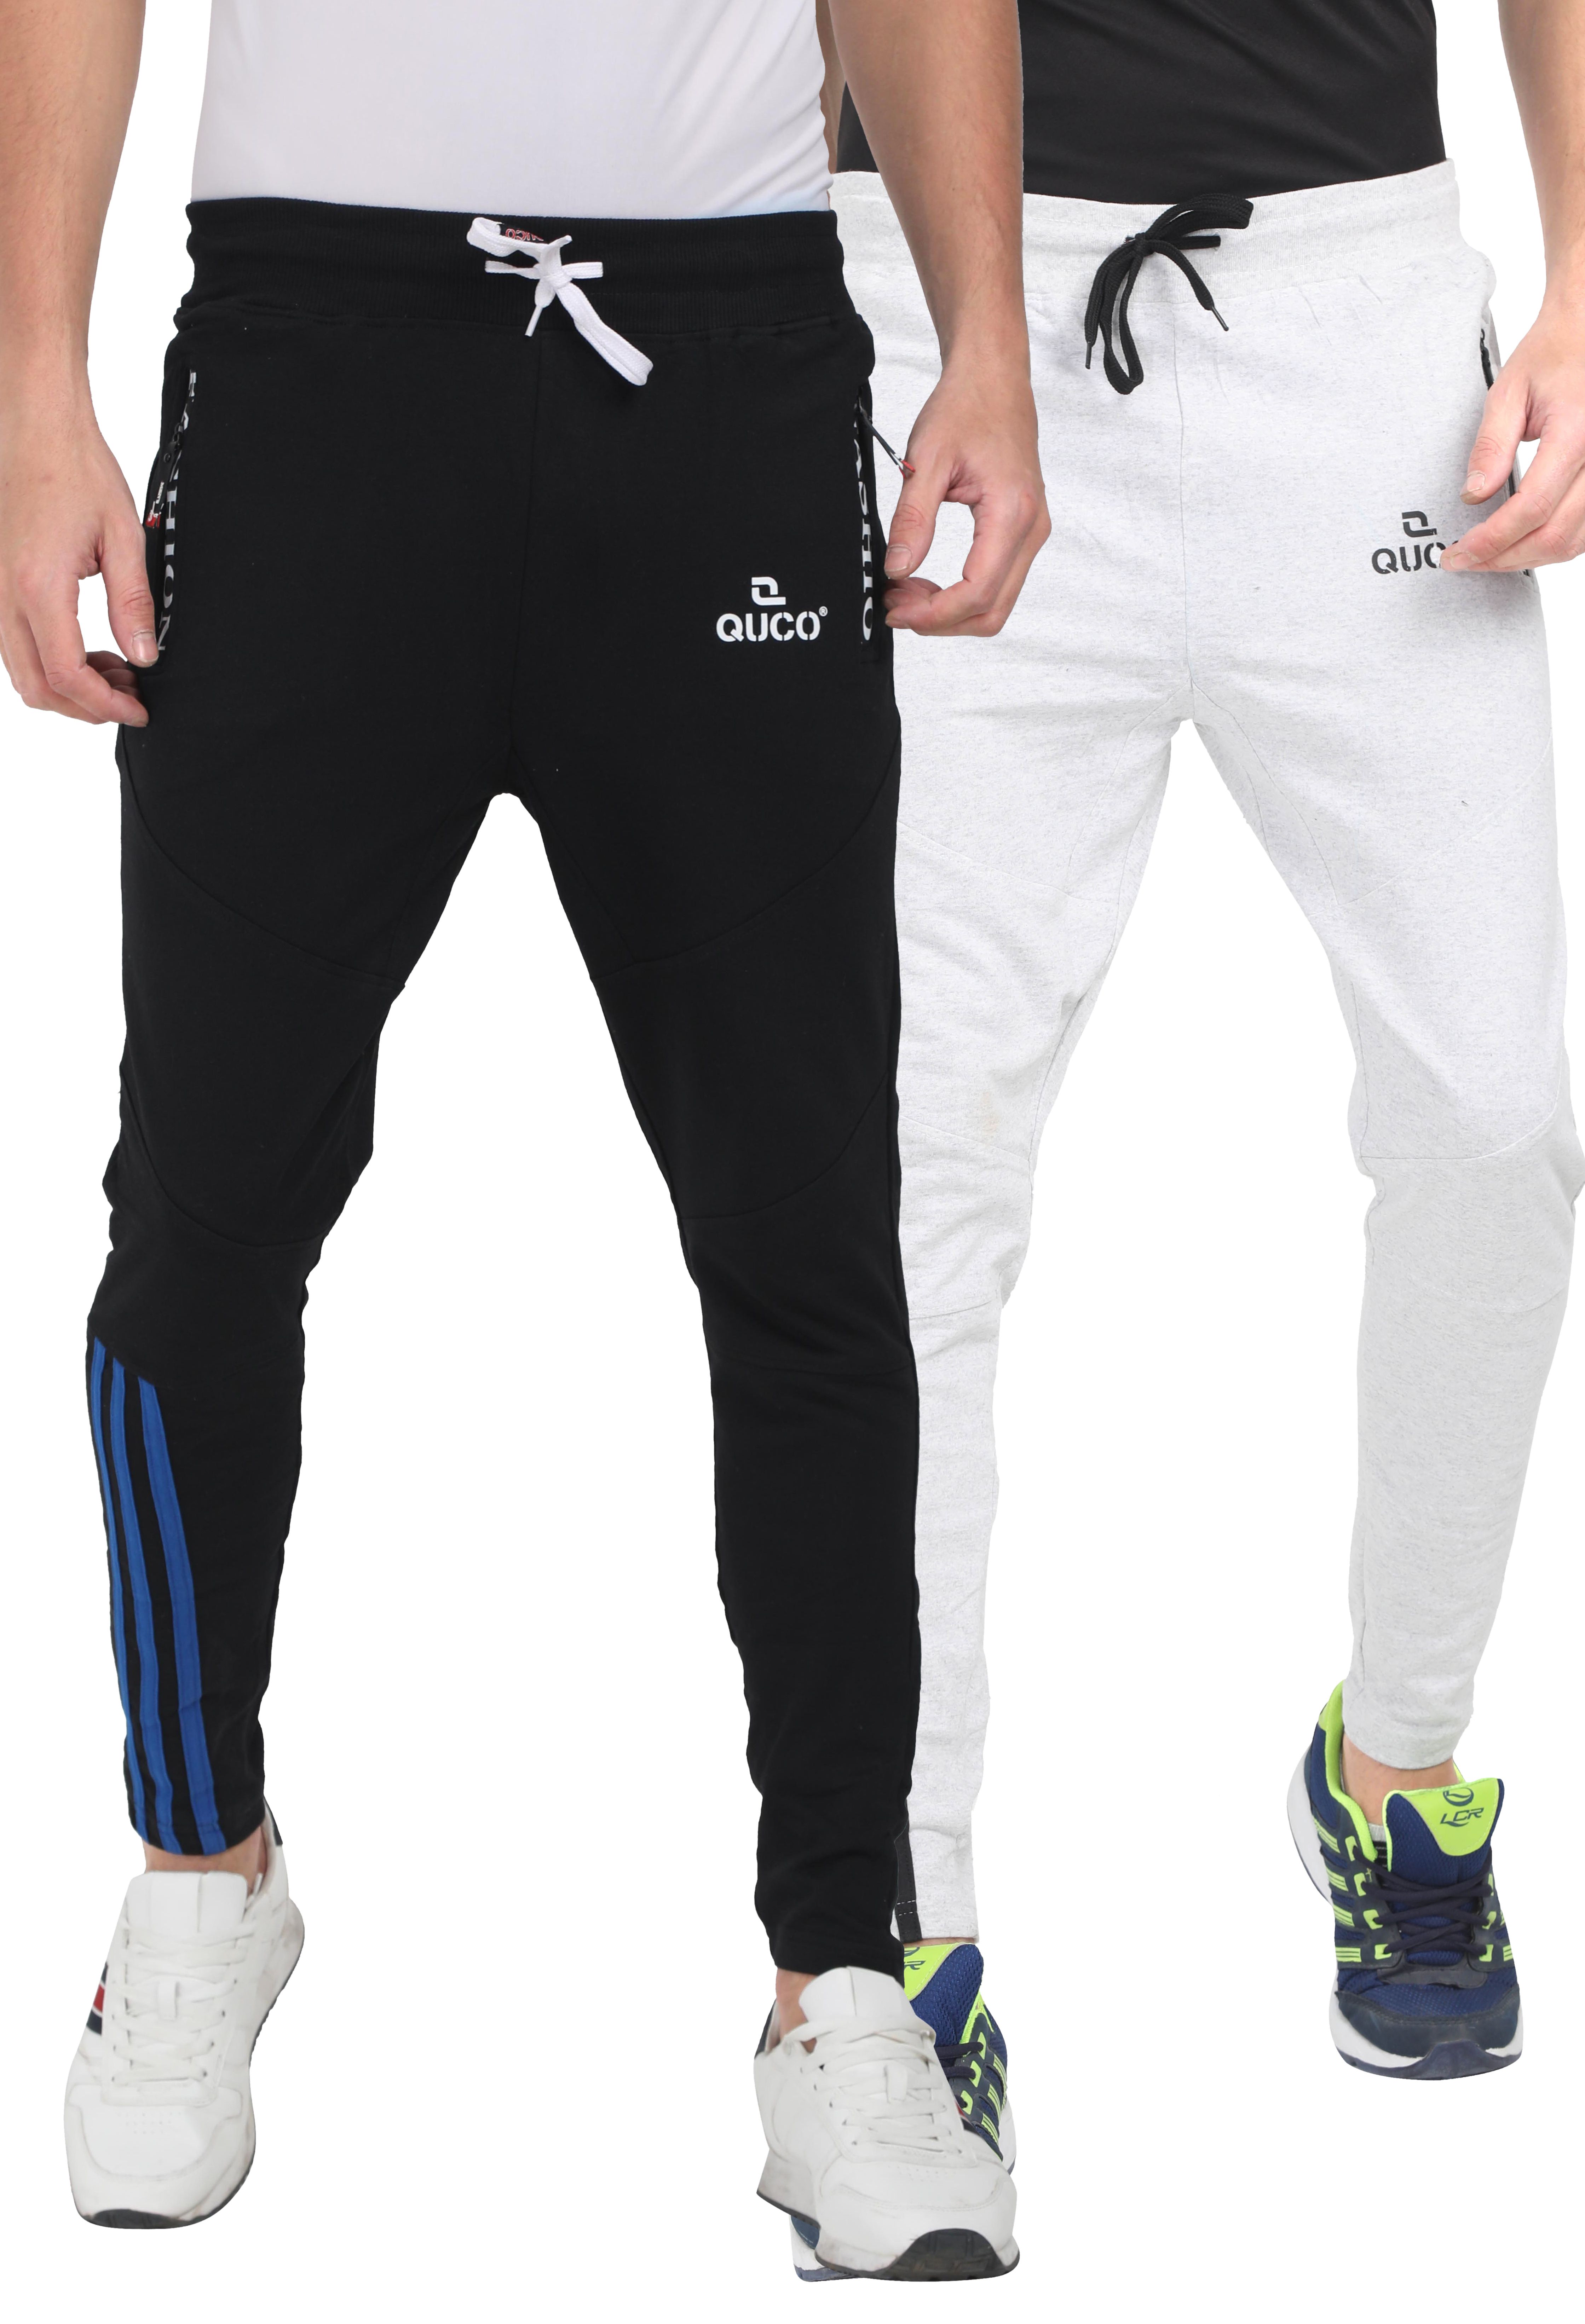 Quco Multi Cotton Trackpants Pack of 2 - Buy Quco Multi Cotton ...